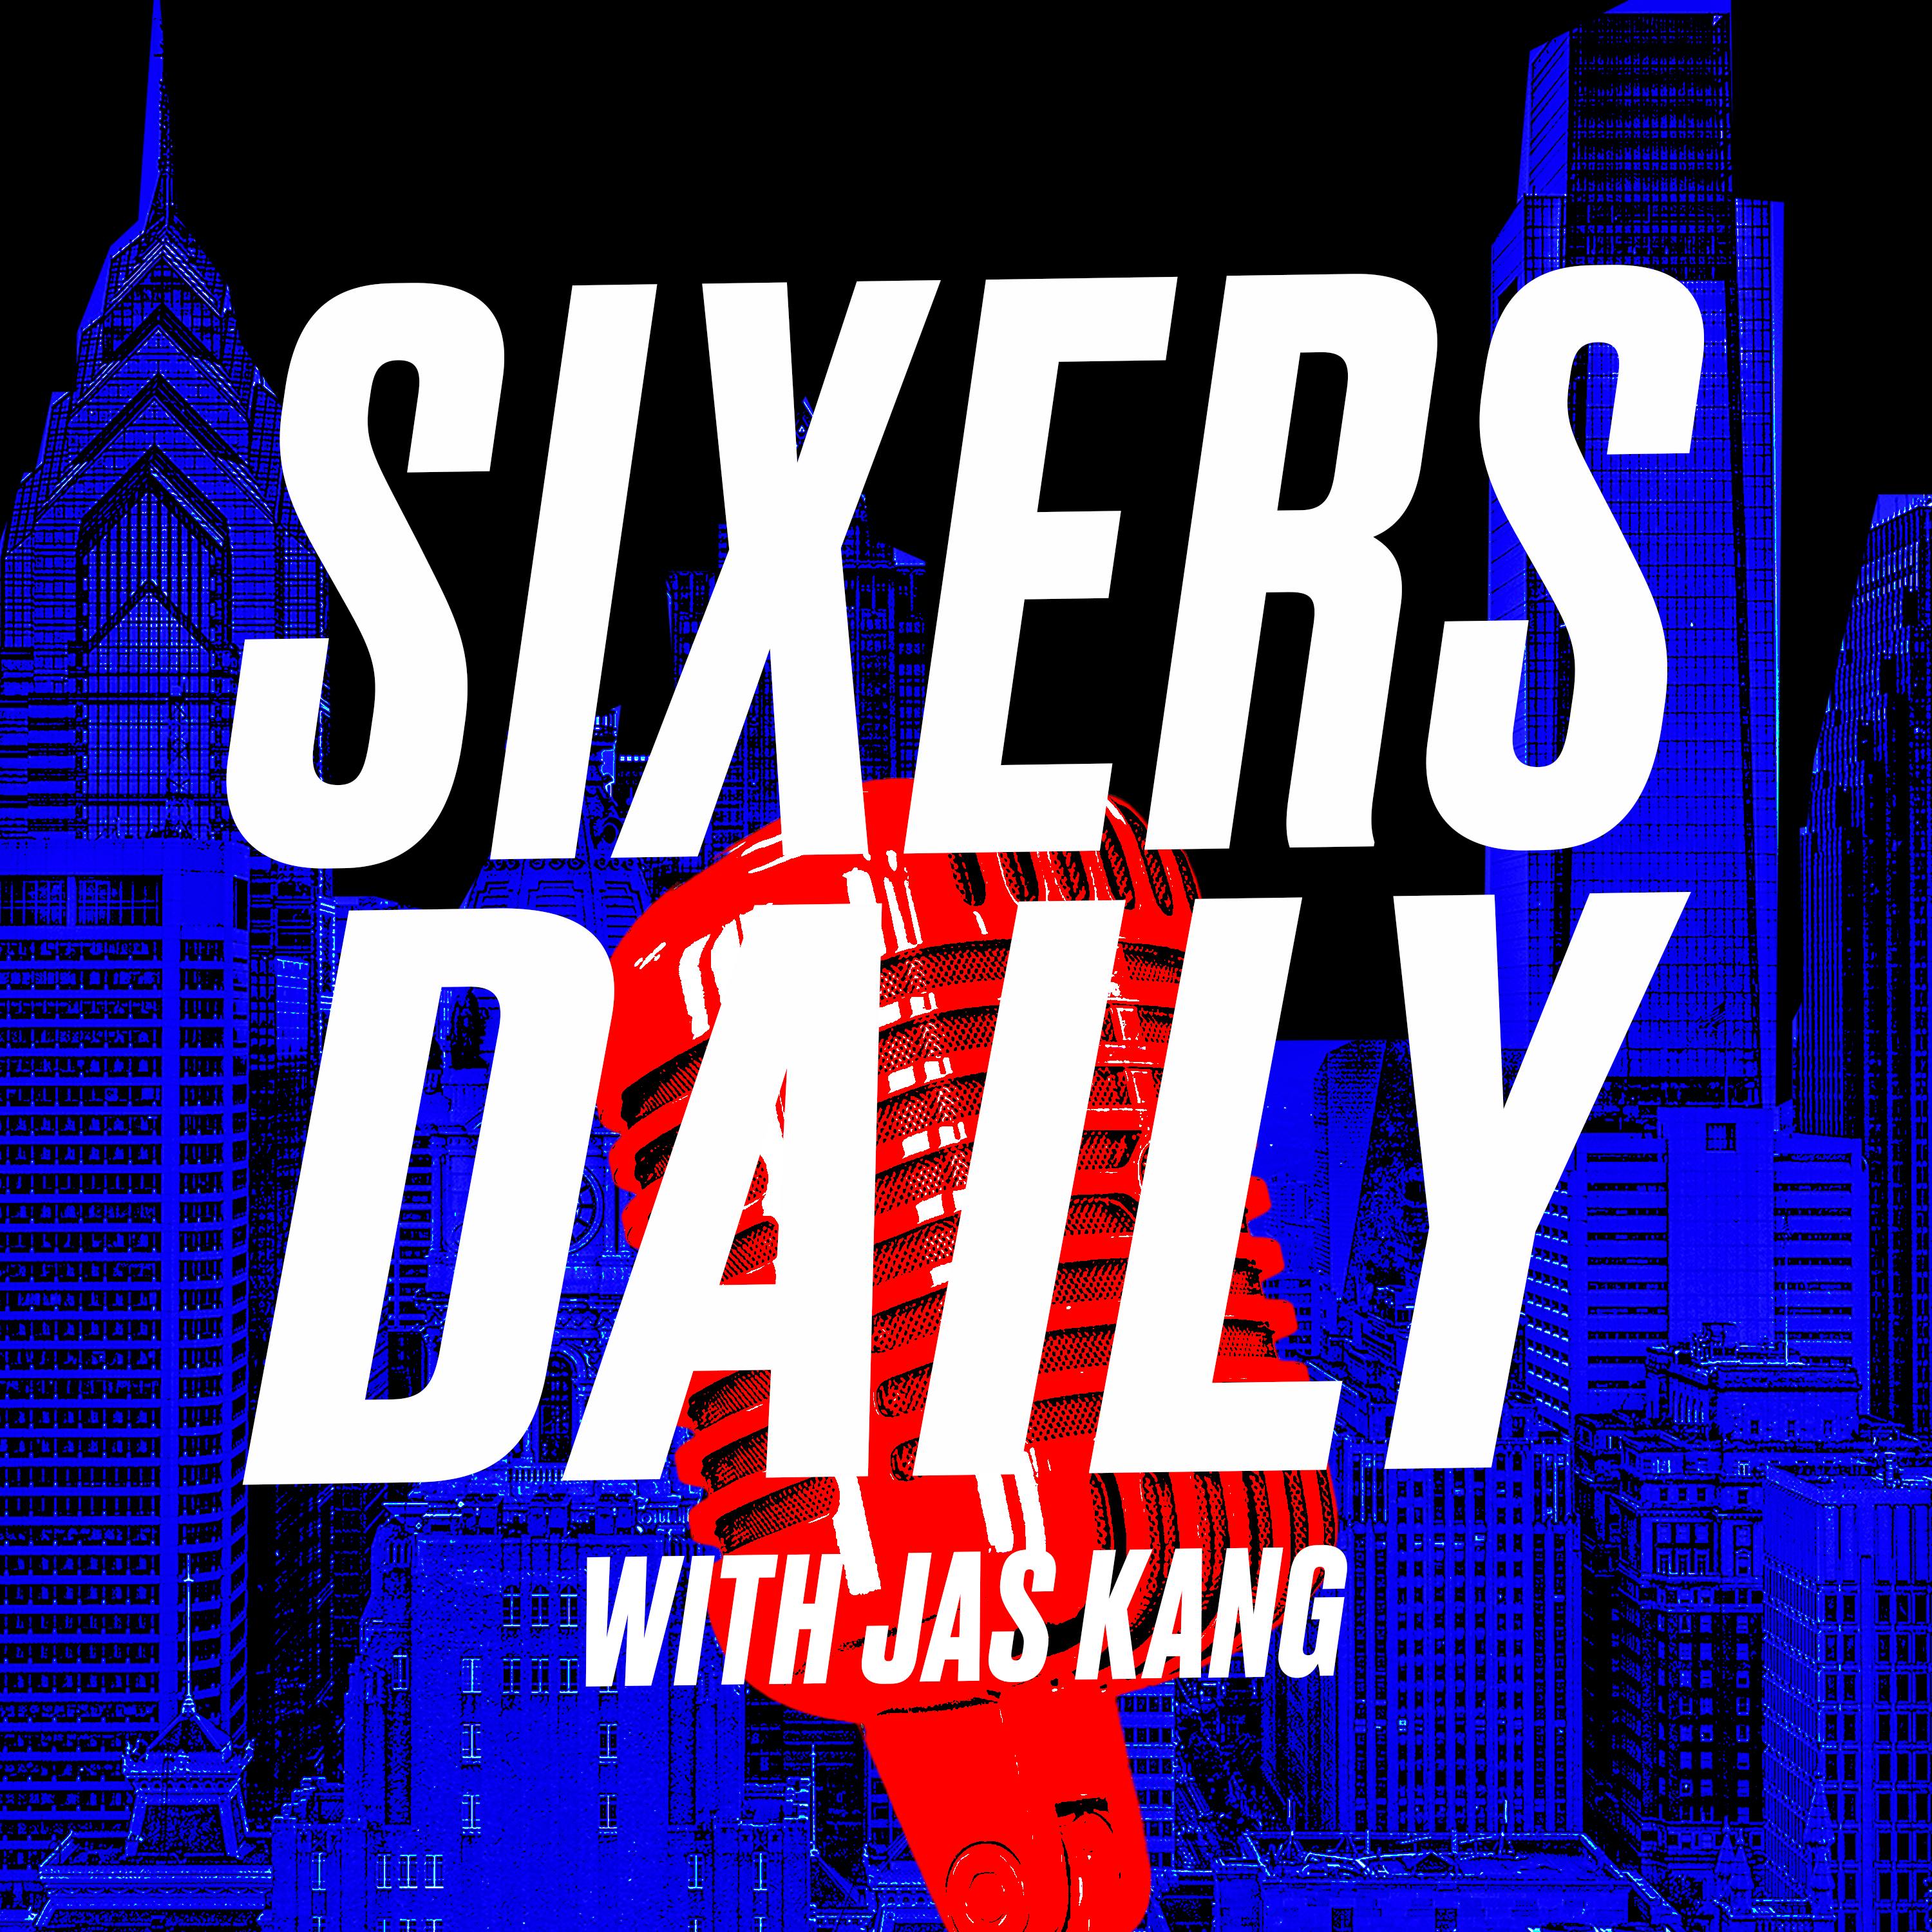 Sixers Daily with Jas Kang - James Harden's contract details, Philly's X-factor for next season, plus Kevin Durant tells the Nets it's either him or Steve Nash/Sean Marks. With Dave Early.